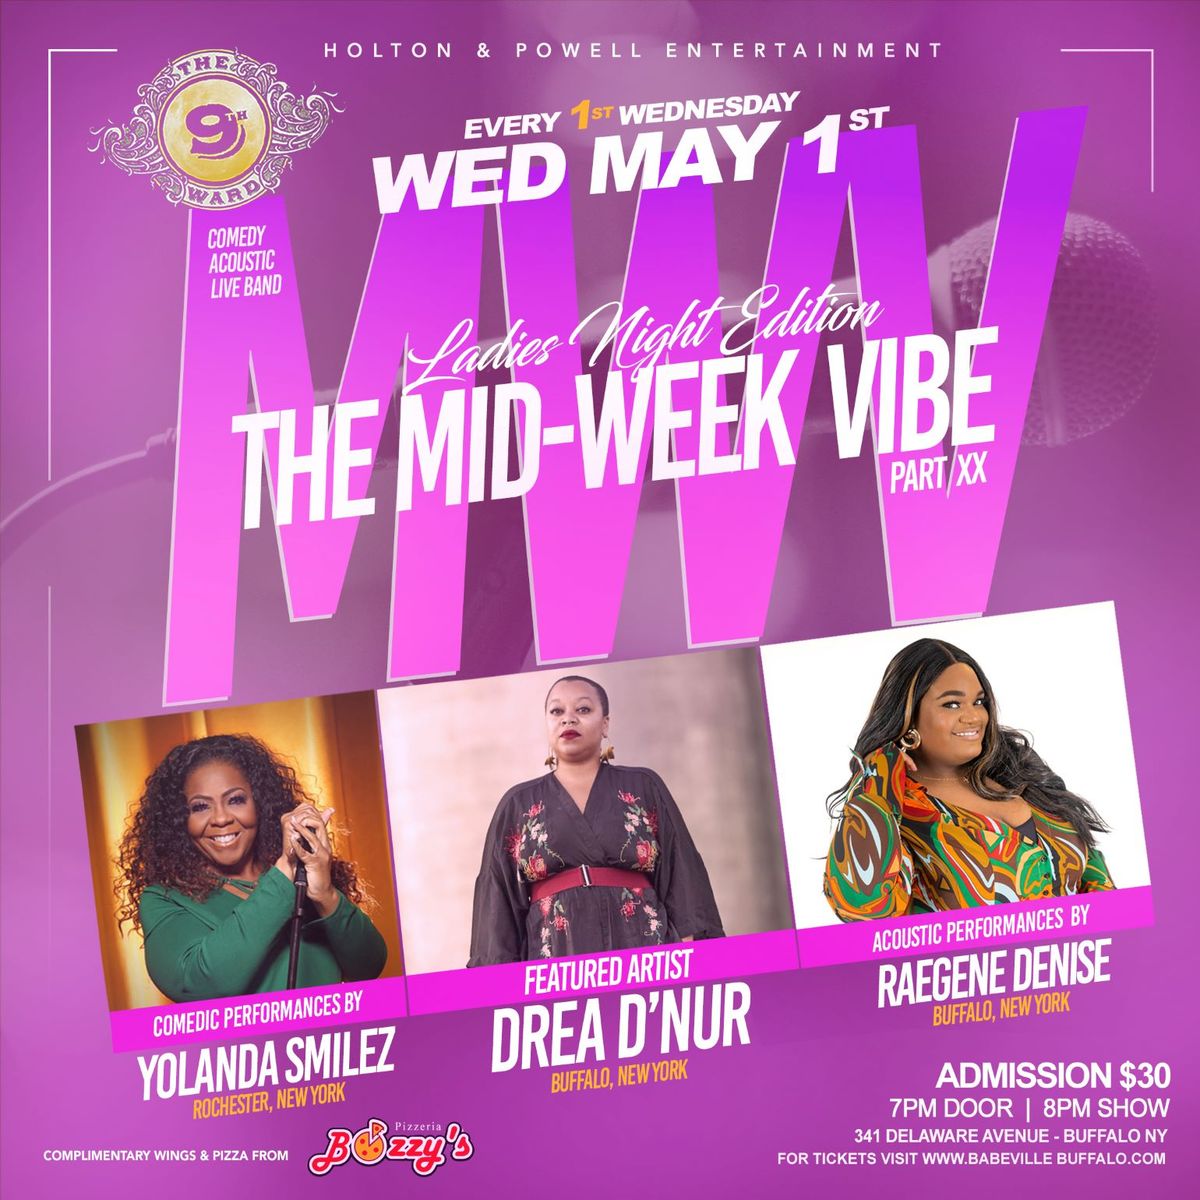 The Mid-Week Vibe Part ** - Ladies Night Edition